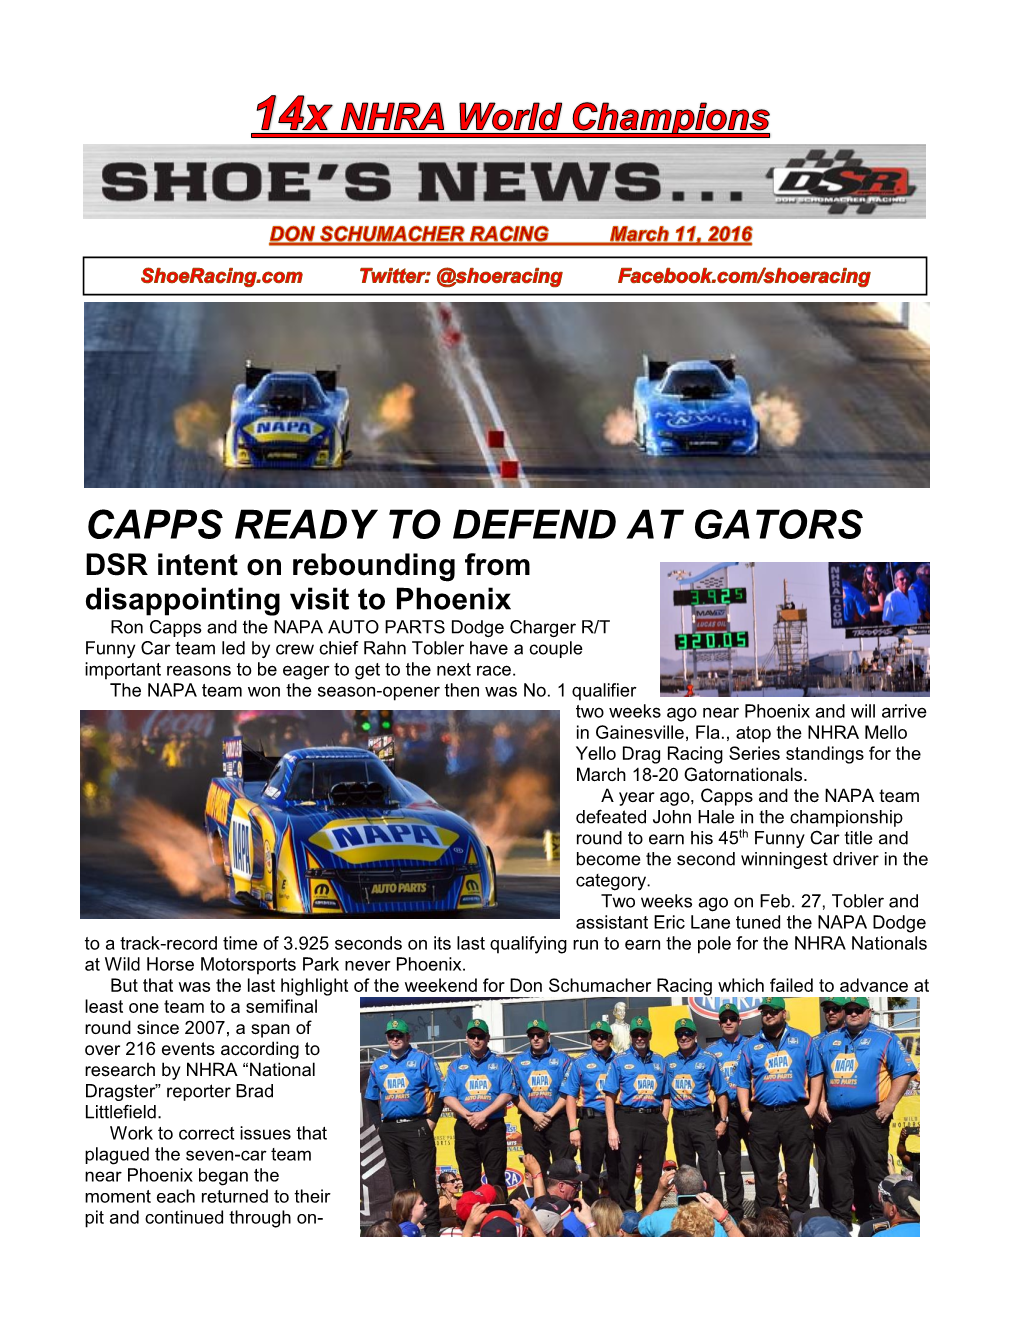 Capps Ready to Defend at Gators